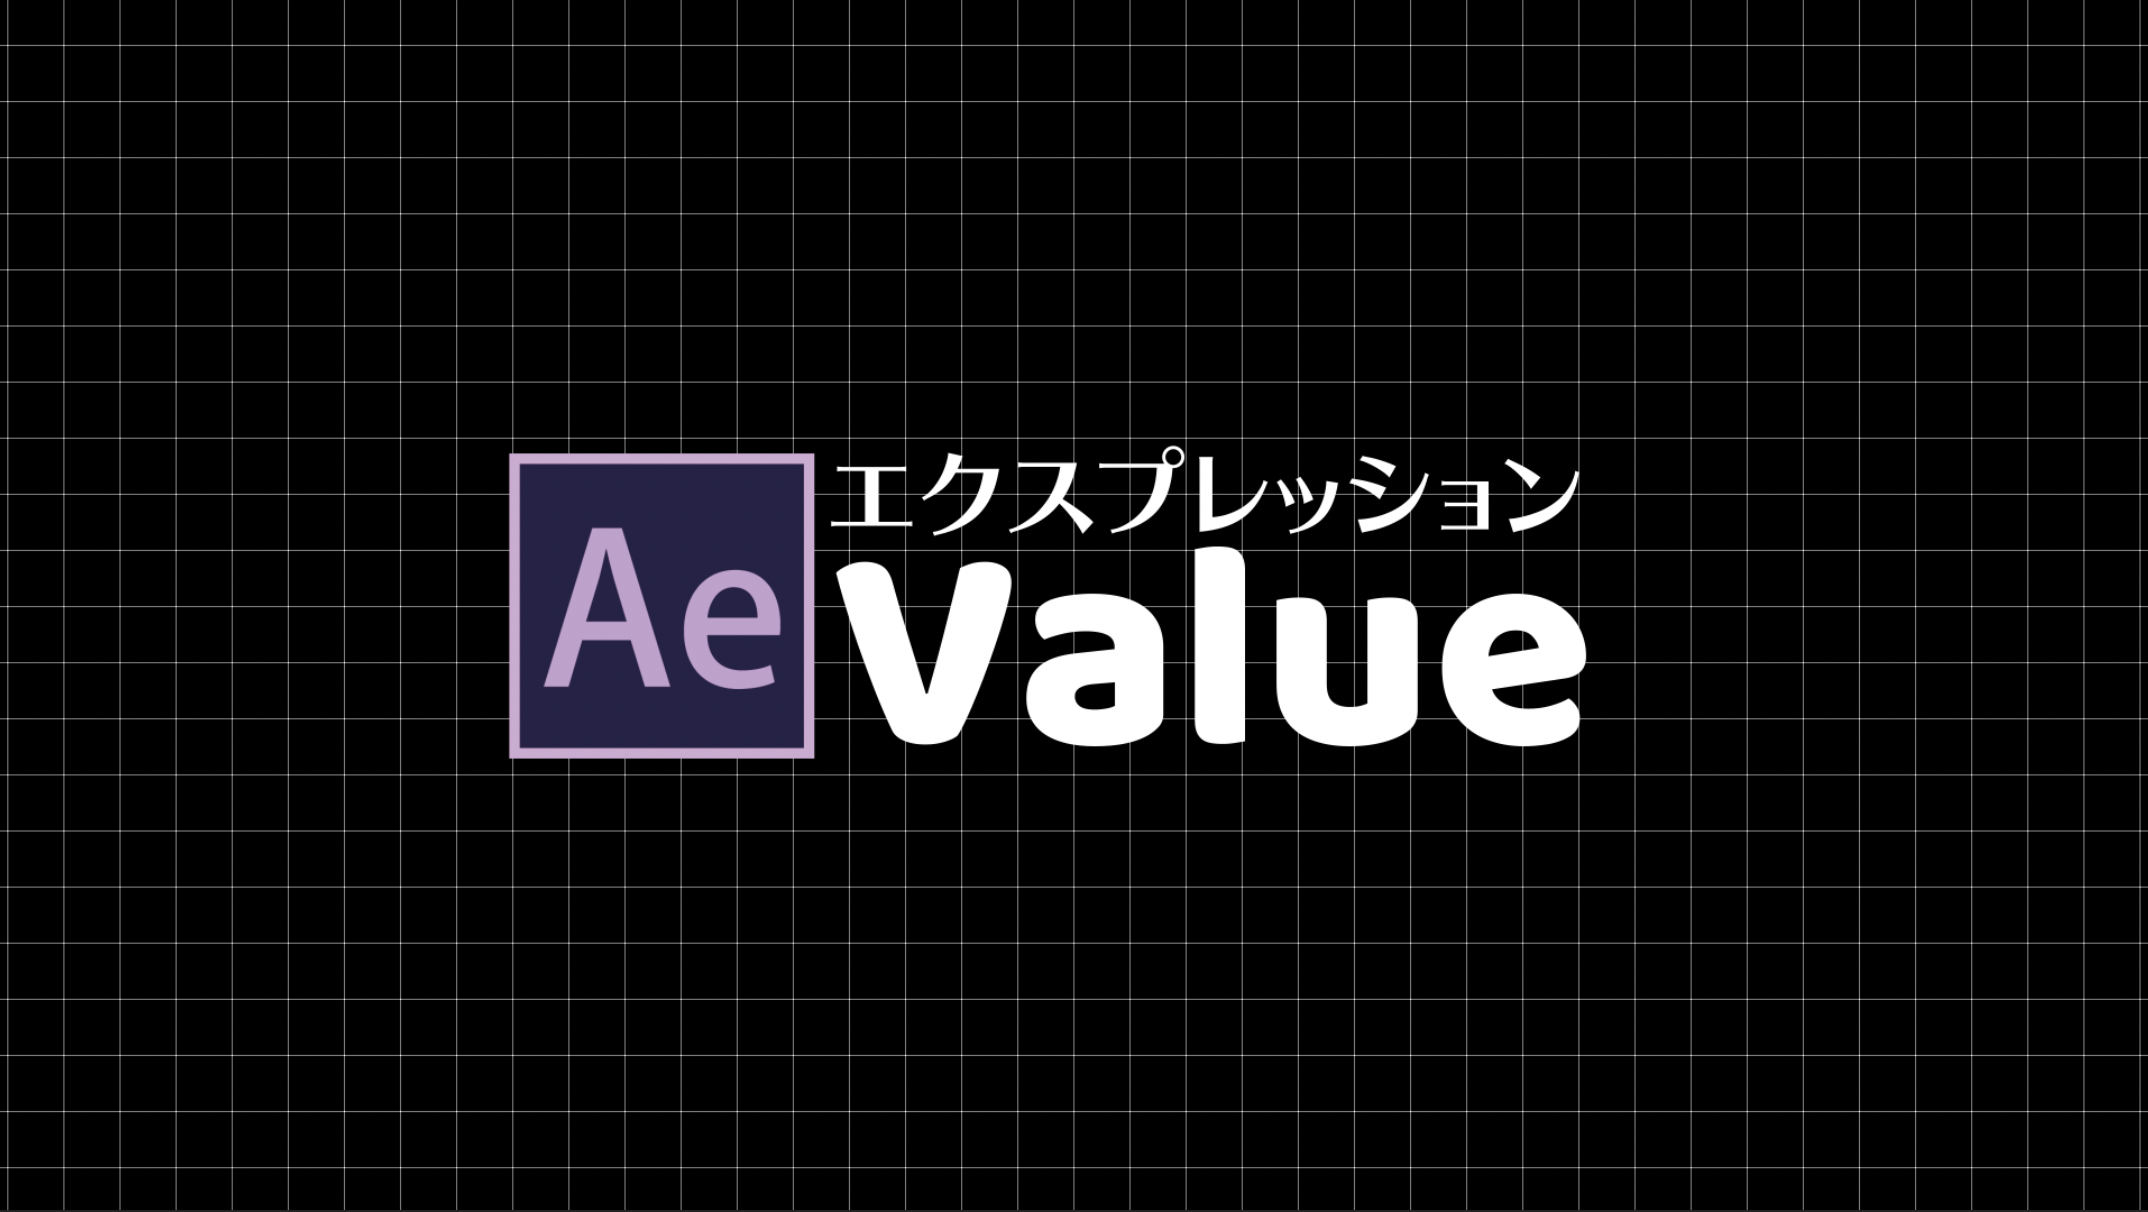 [AfterEffects]エクスプレッションのvalueとは何か？